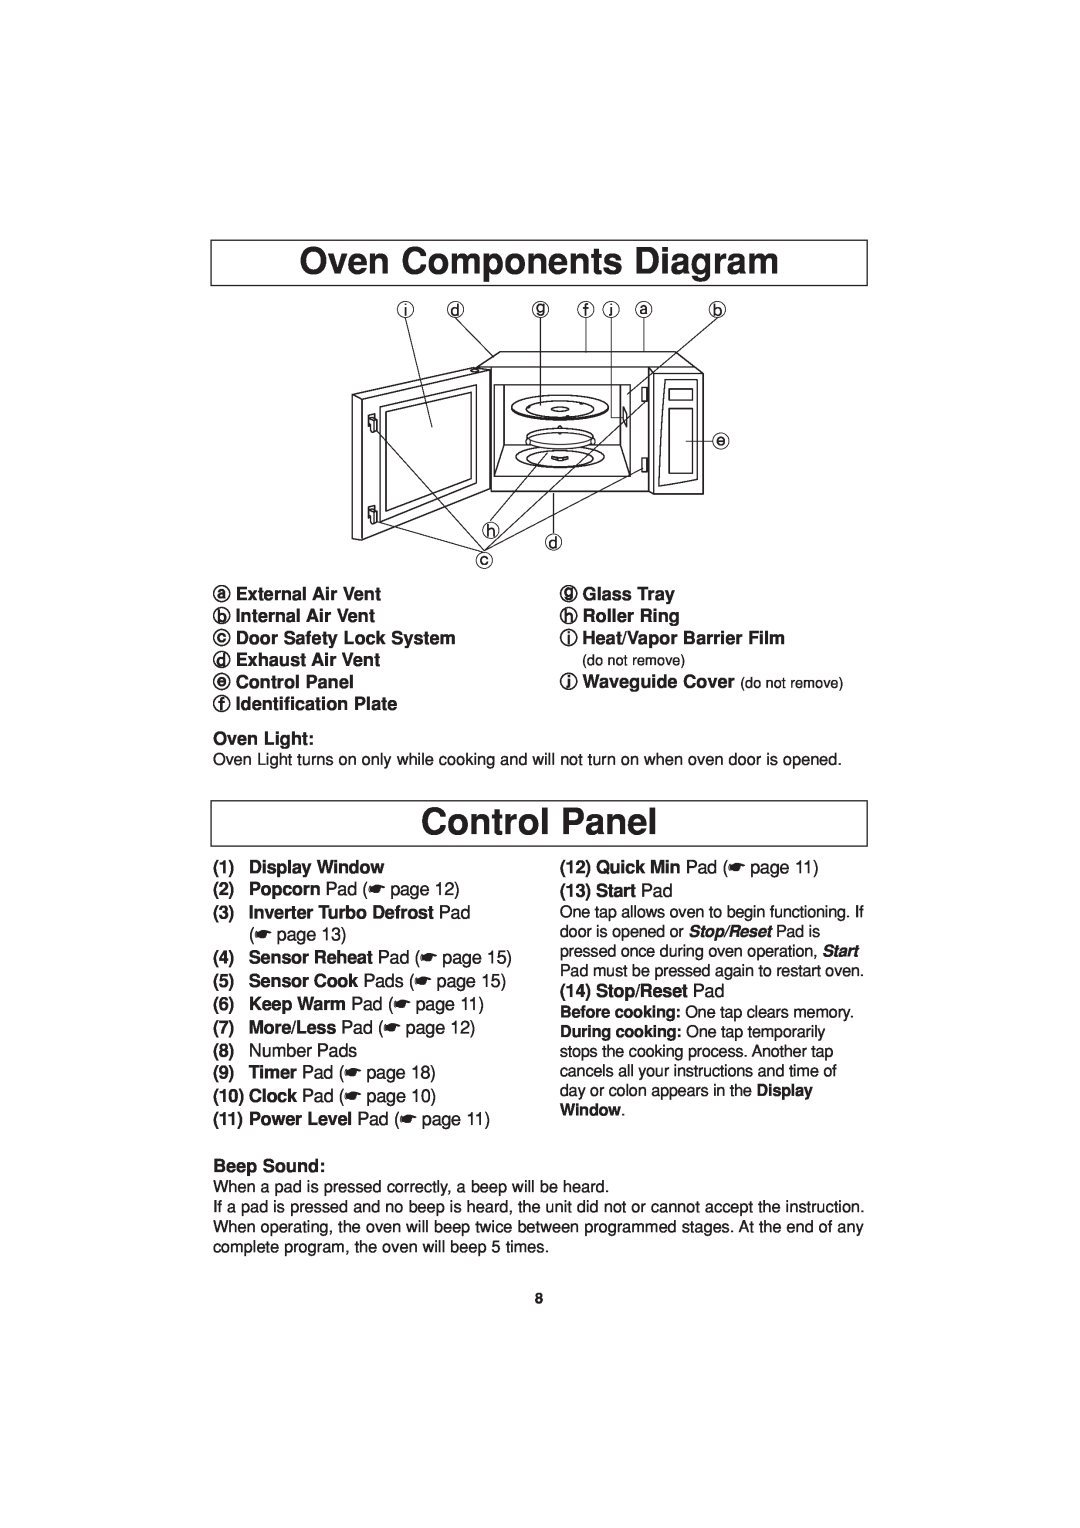 Panasonic NN-H604, NN-H614, NN-H504 important safety instructions Oven Components Diagram, Control Panel 